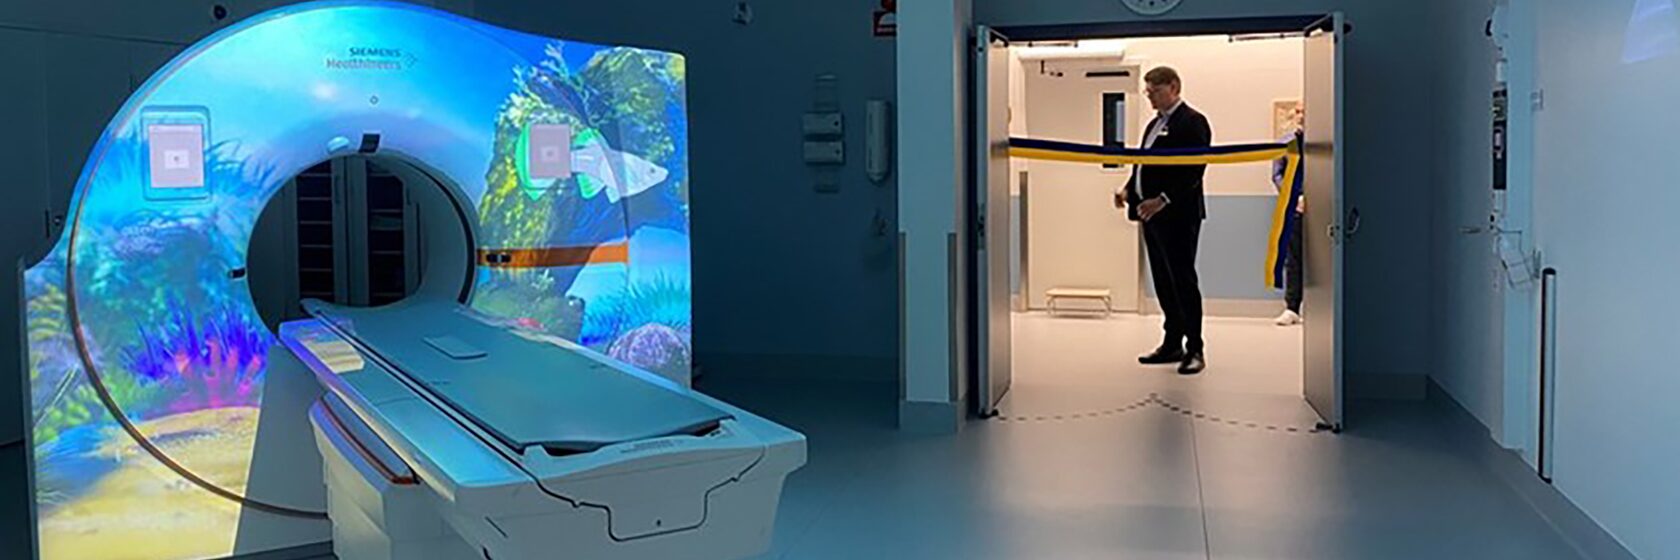 IMMERSIVE PROJECTION CALMS CHILDREN DURING CT SCANS AT SWEDISH HOSPITALS